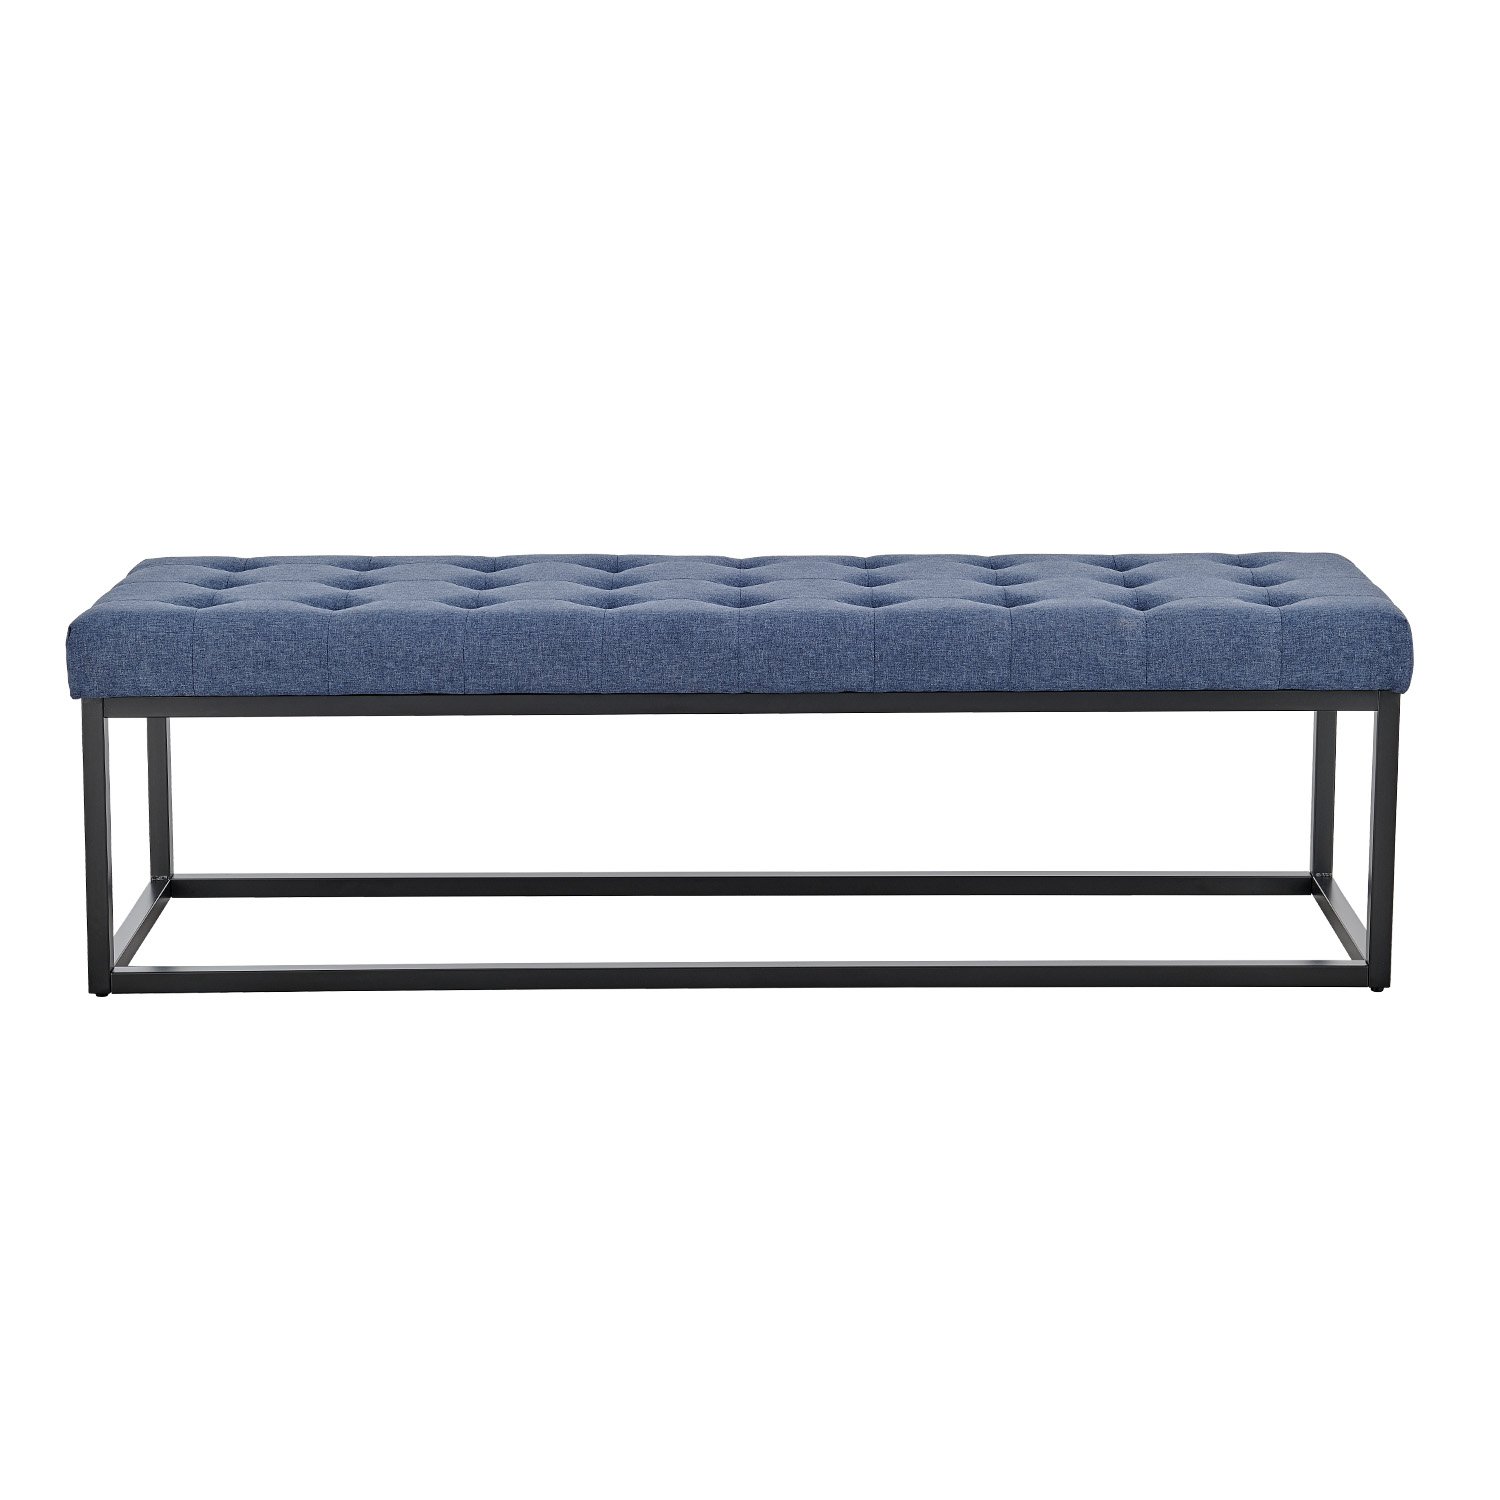 Cameron Button-Tufted Upholstered Bench with Metal Legs - Blue 1